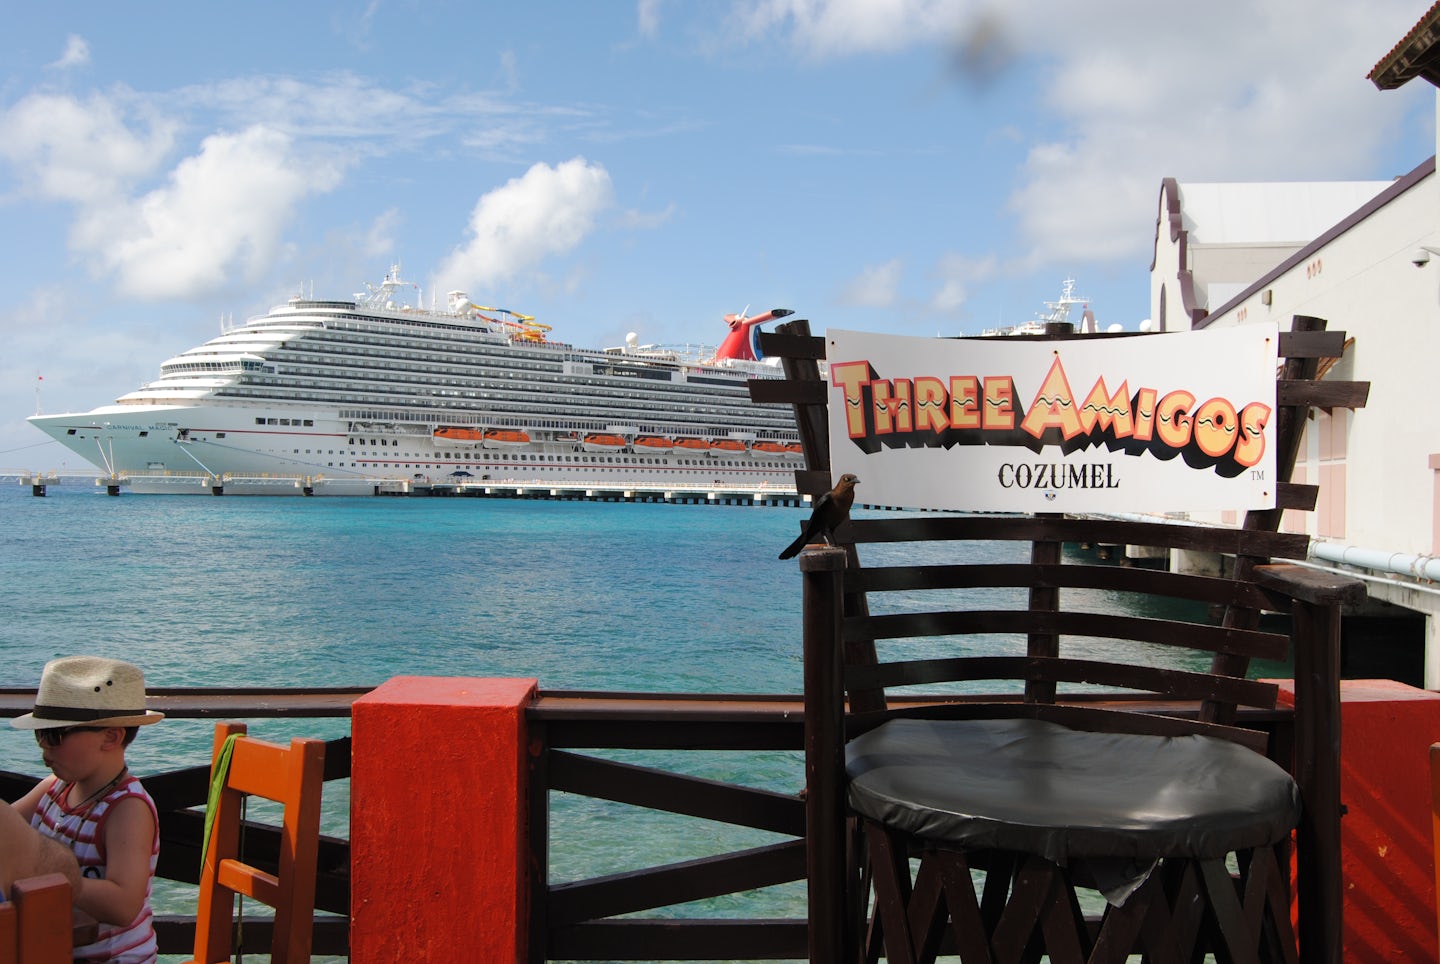 Carnival Magic from Three Amigos in Cozumel